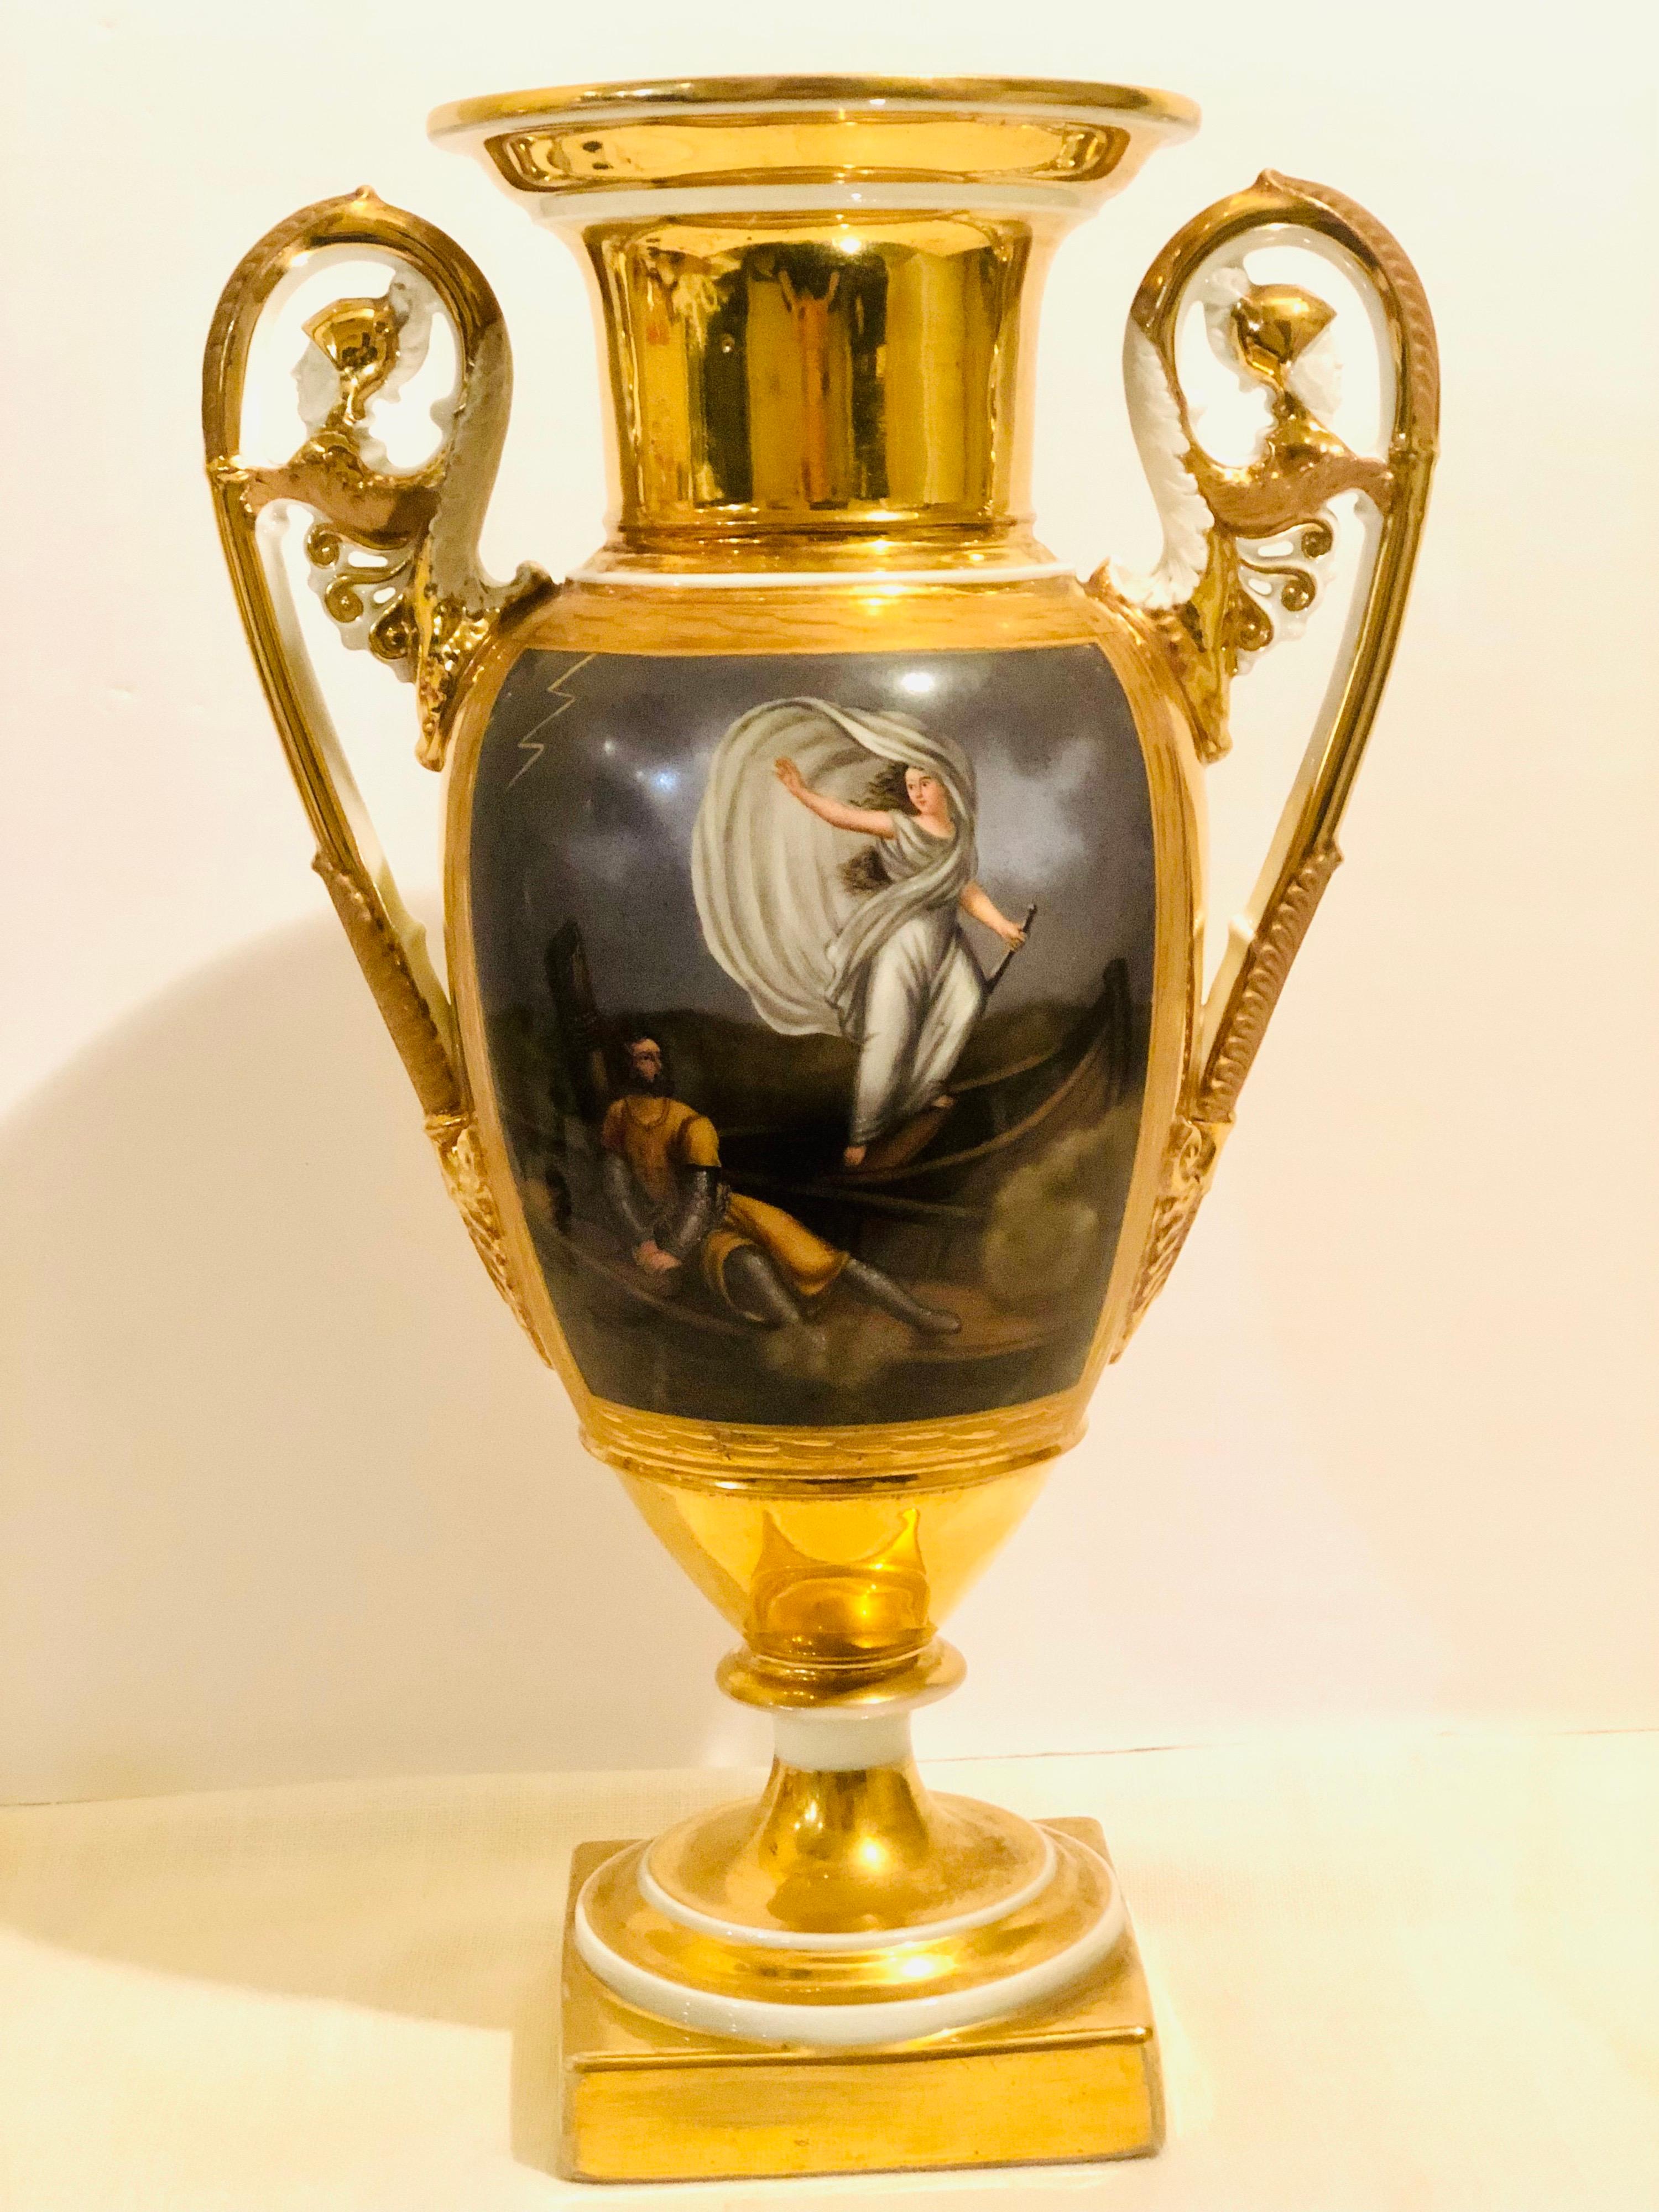 I want to offer you this fabulous Old Paris porcelain vase. This vase is hand painted on both of its sides with different beautiful paintings. One side has a detailed painting of a seascape with people on the shoreline and buildings and boats in the